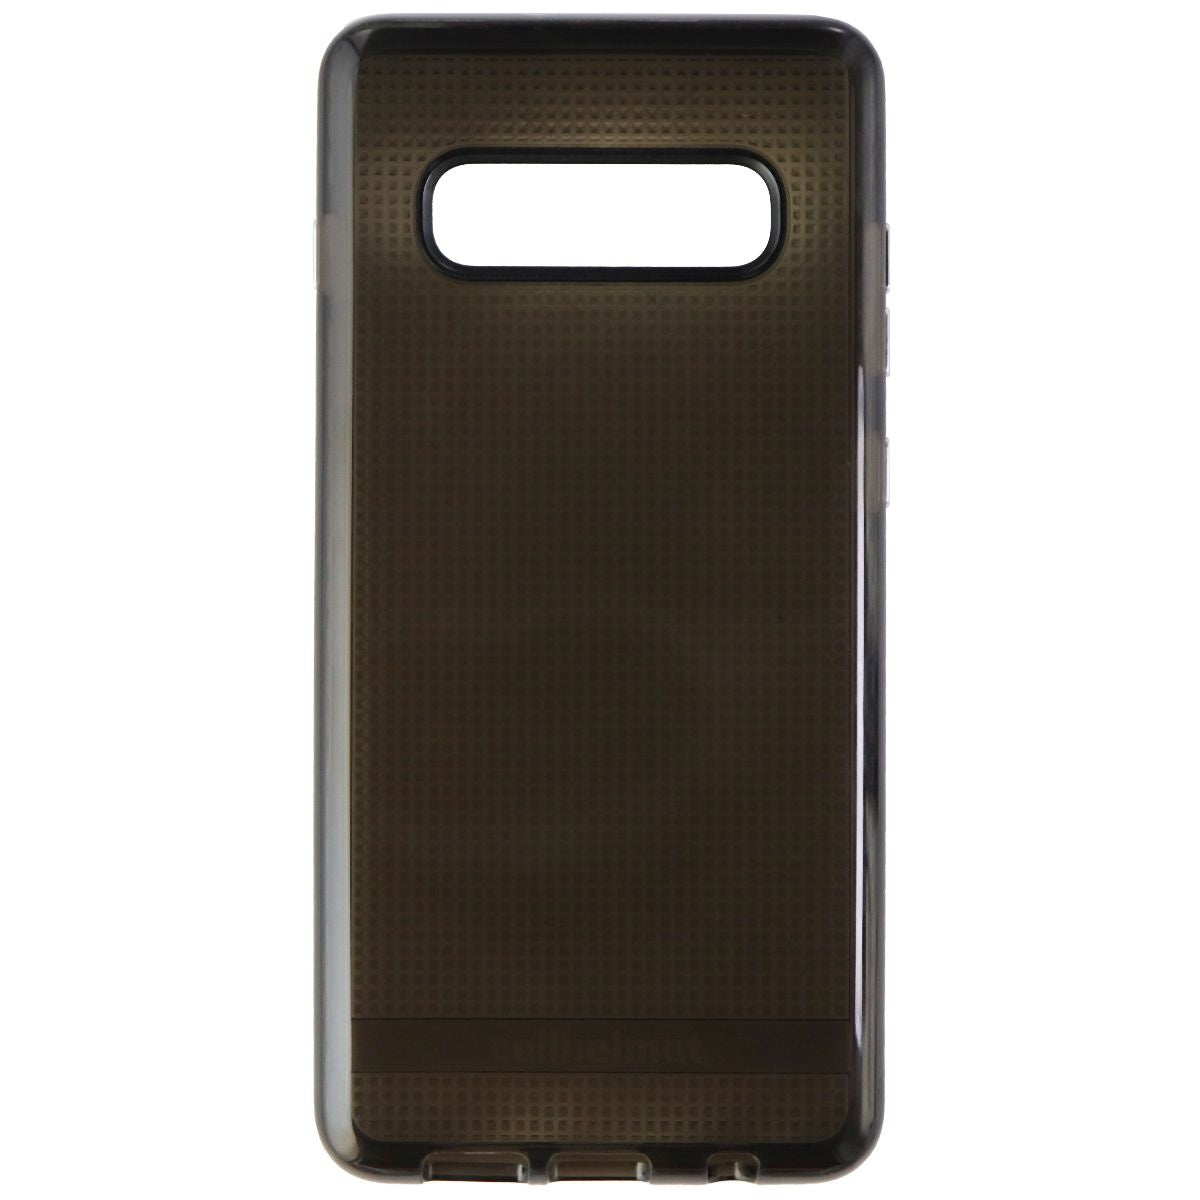 DO NOT USE - Check SC-Z13219 Family Cell Phone - Cases, Covers & Skins CellHelmet    - Simple Cell Bulk Wholesale Pricing - USA Seller